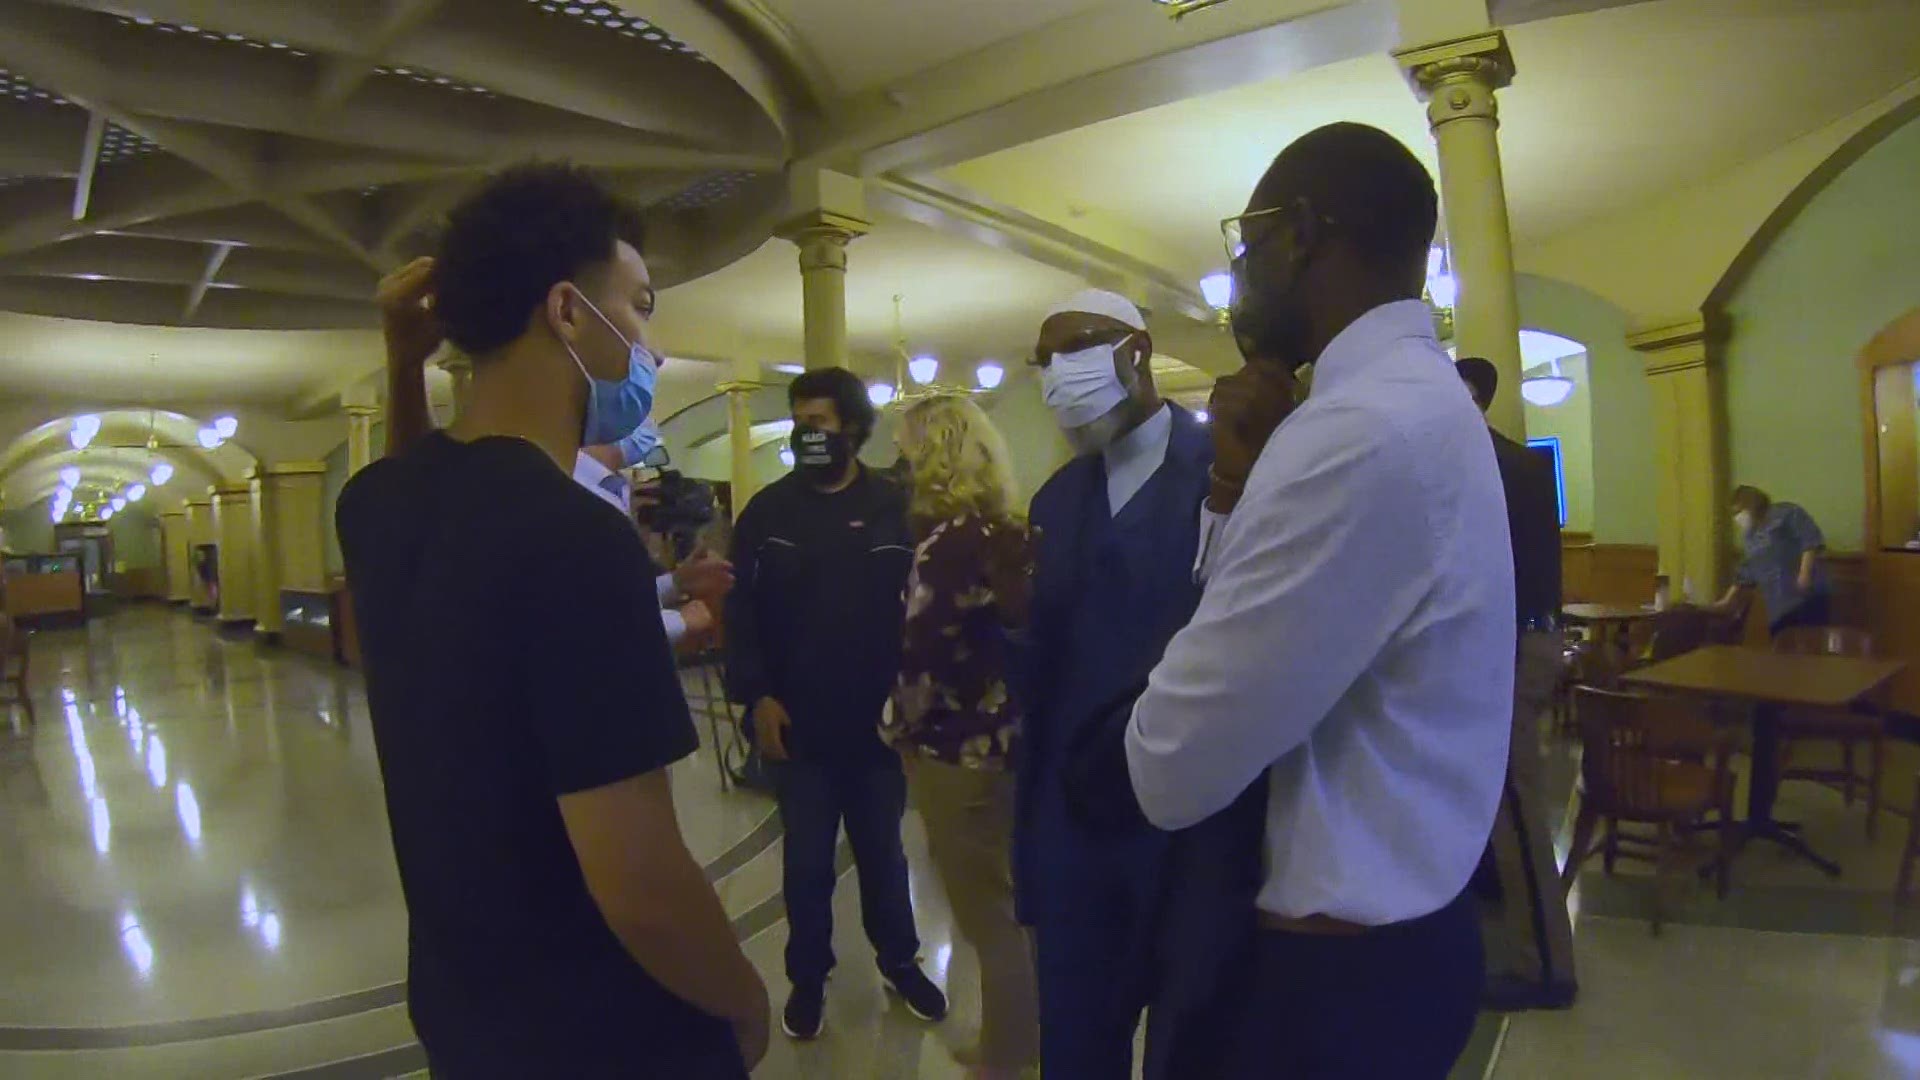 Tuesday, leaders with Des Moines Black Lives Matter went to the state Capitol and met with four state legislators who said they'd share demands with Gov. Reynolds.